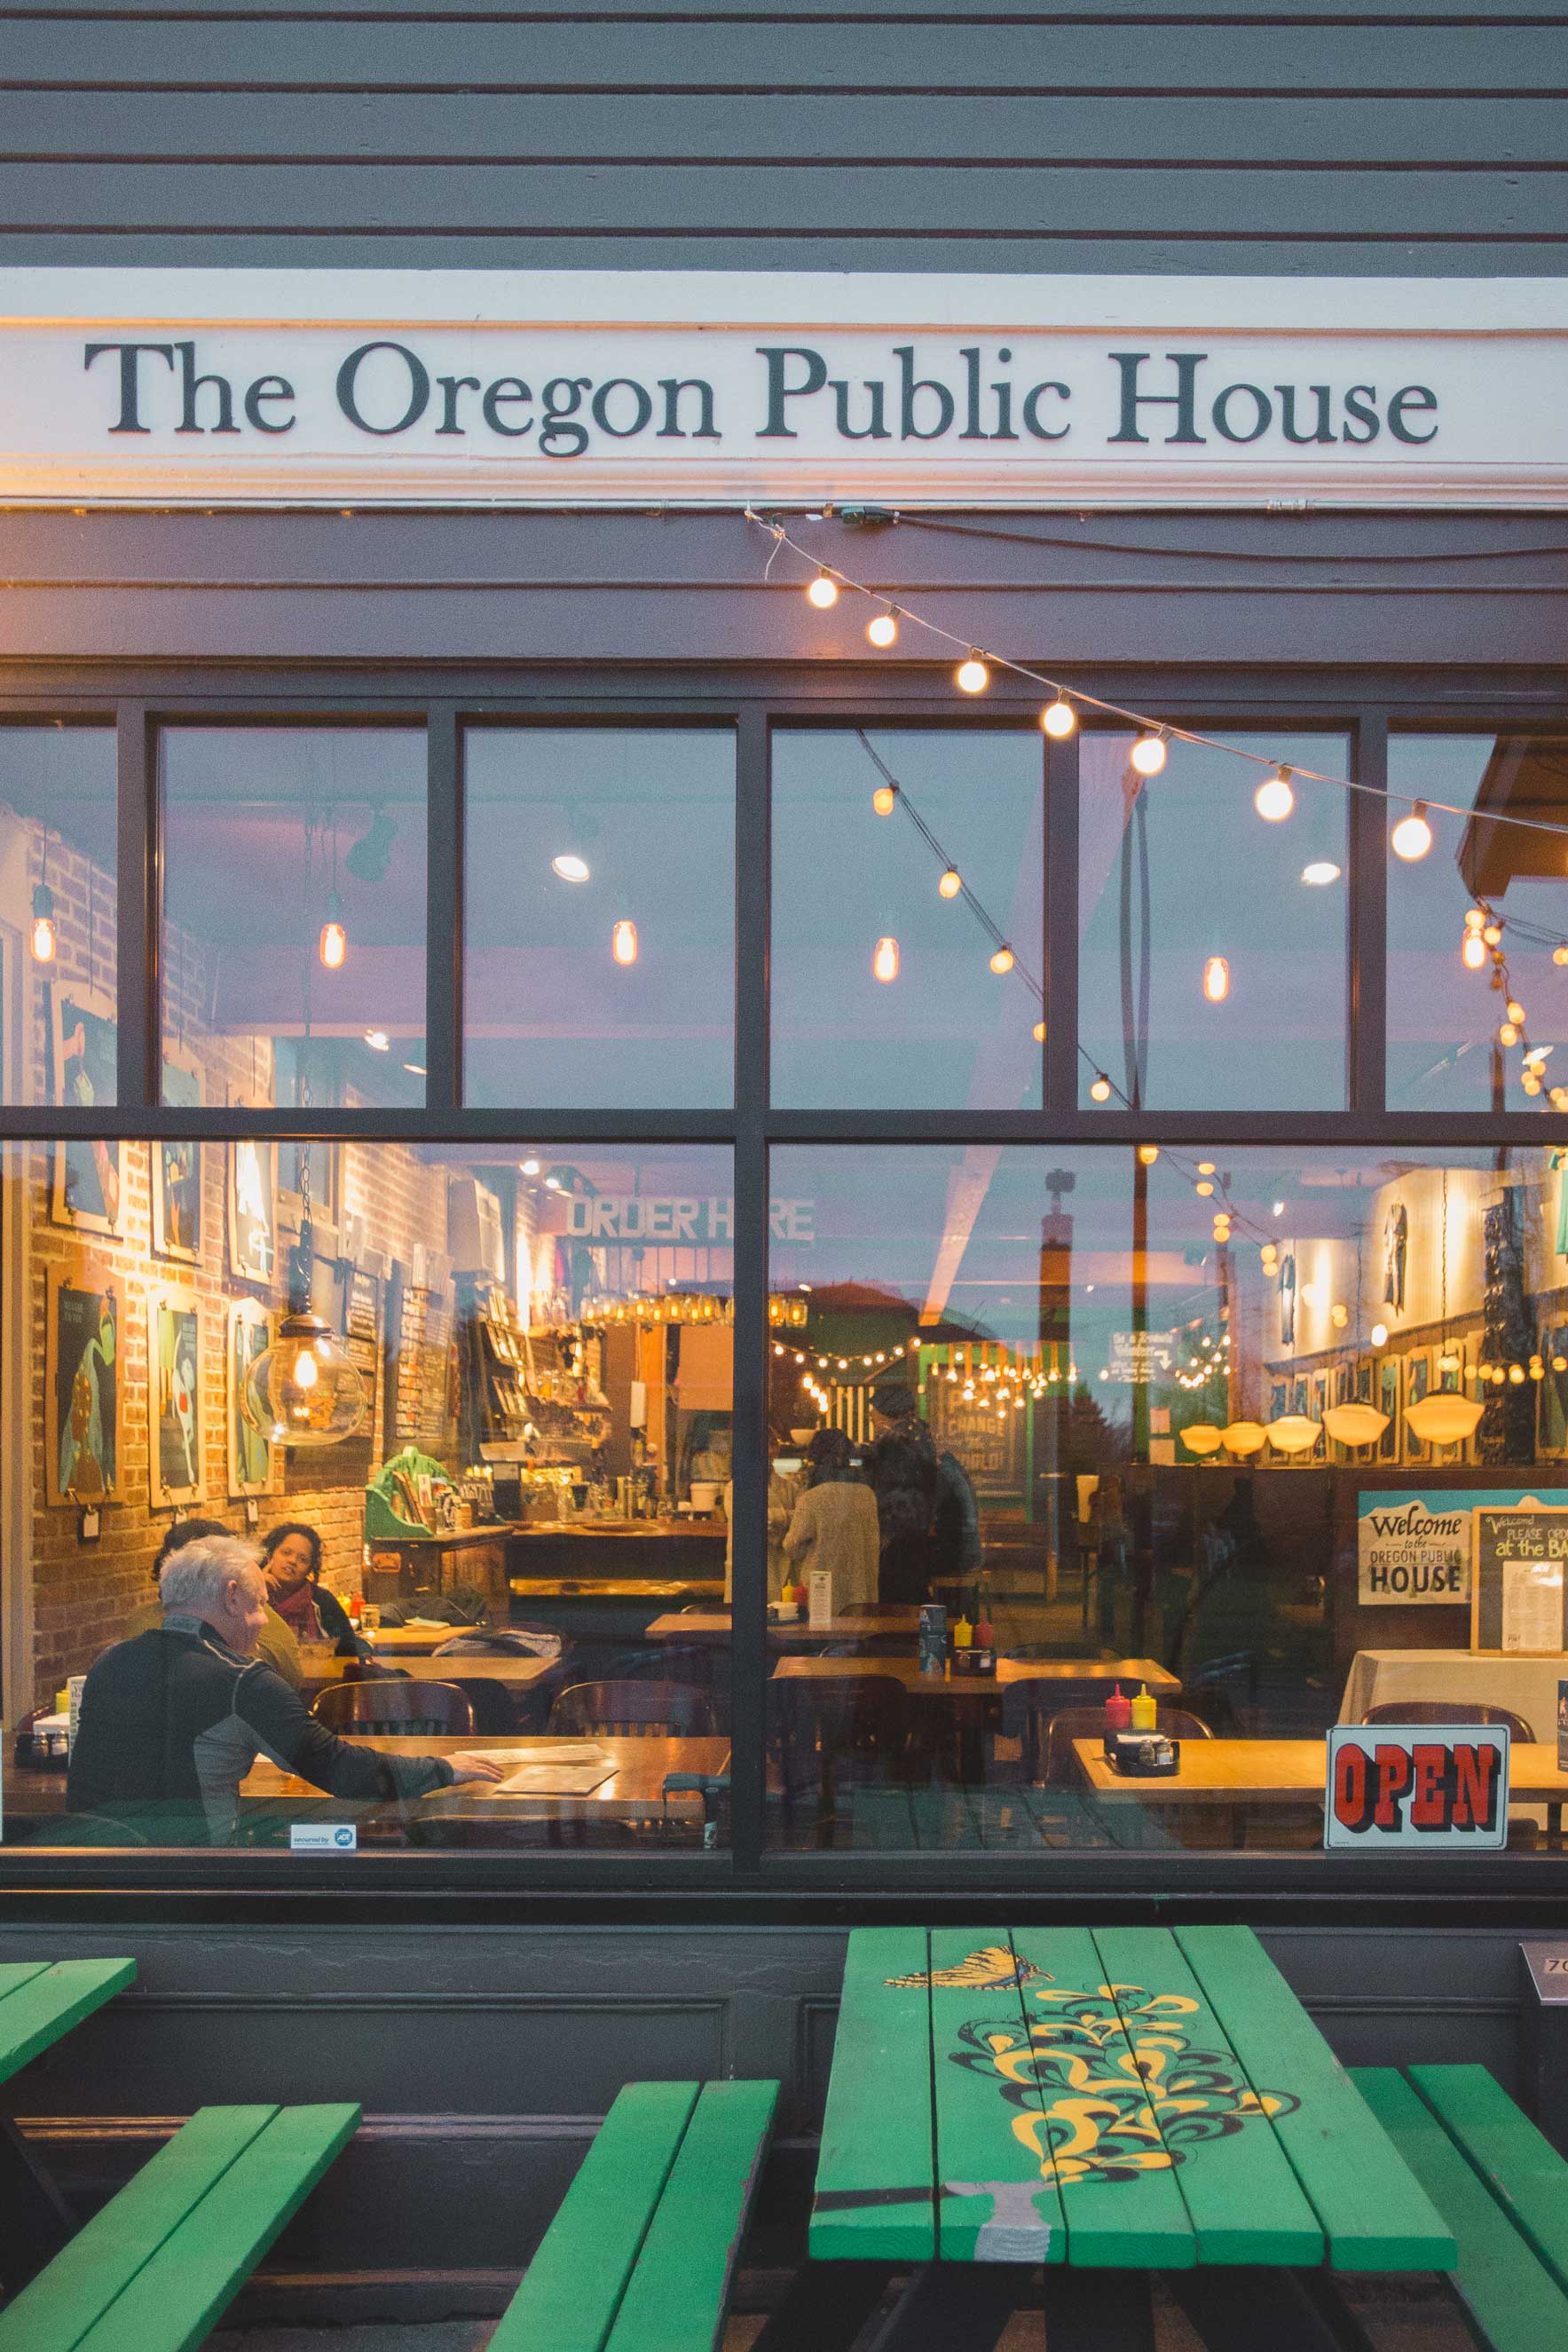 The exterior of The Oregon Public House, with open sign in the window and green painted wooden tables pushed up against the window.